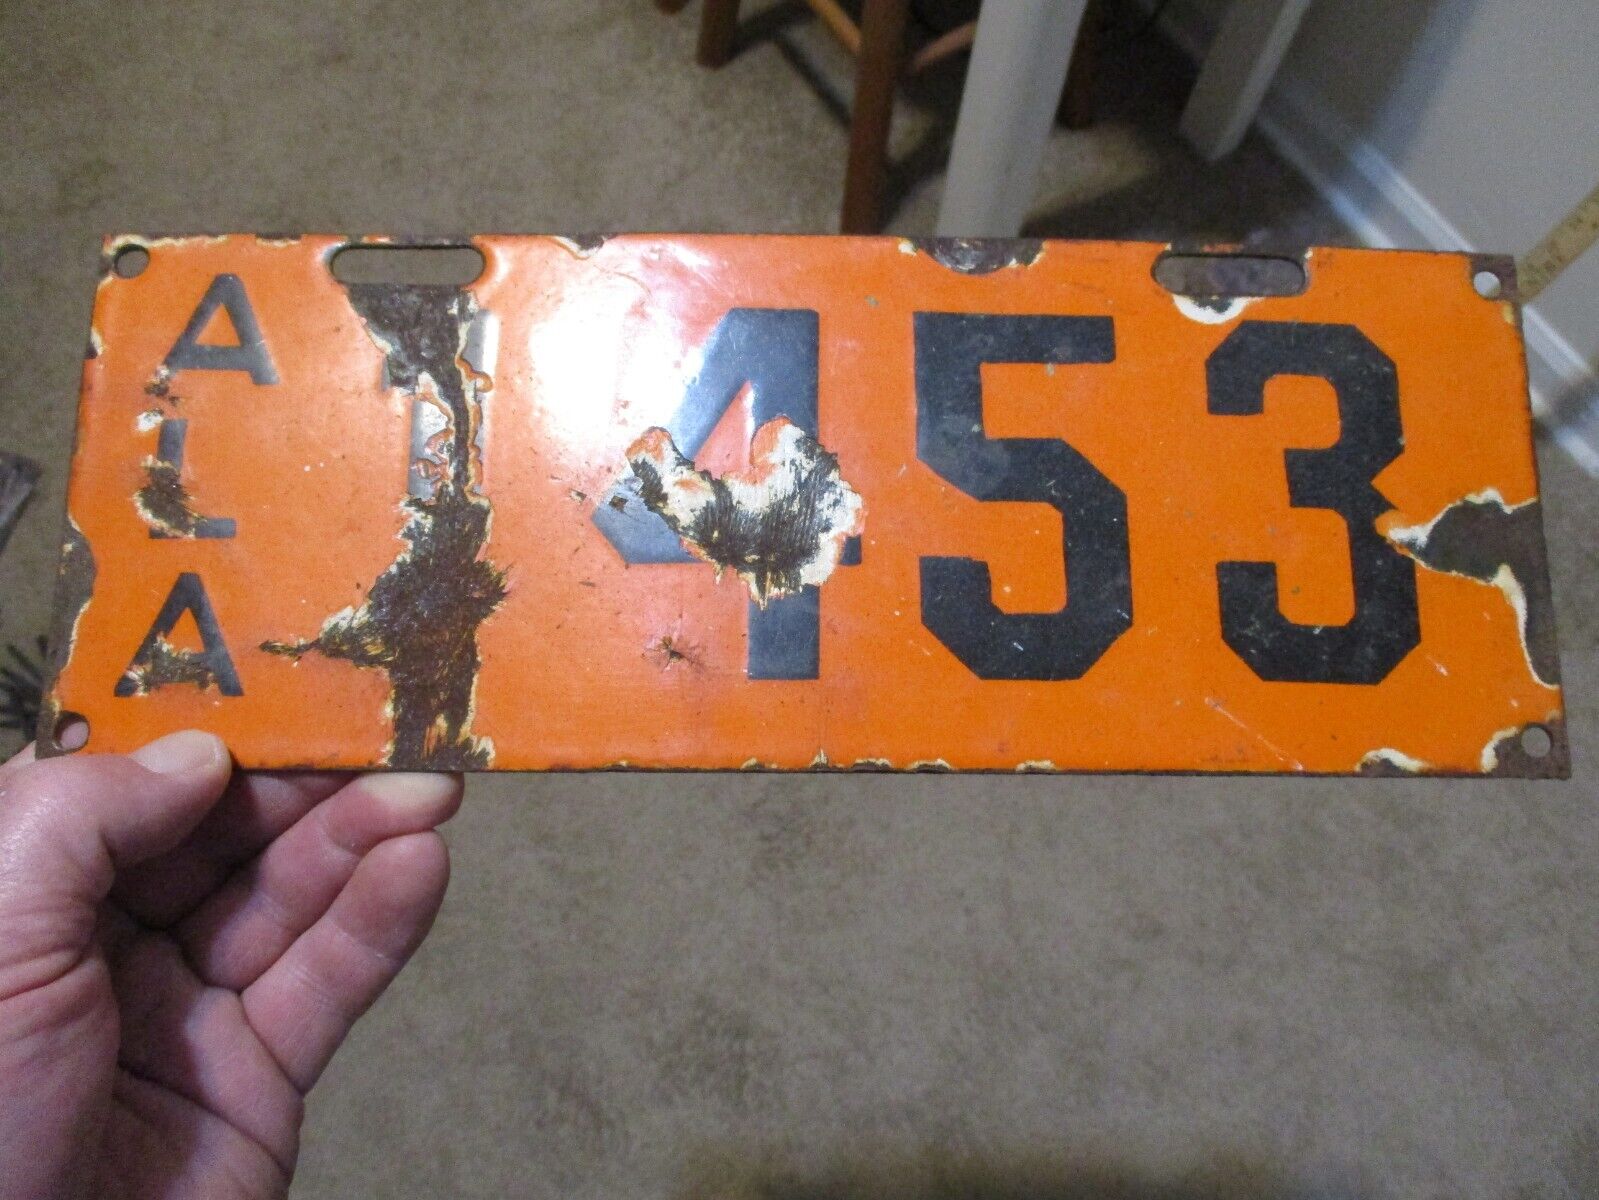 1913 ALABAMA PORCELAIN LOW # 1453 LICENSE PLATE  2nd YEAR ISSUE